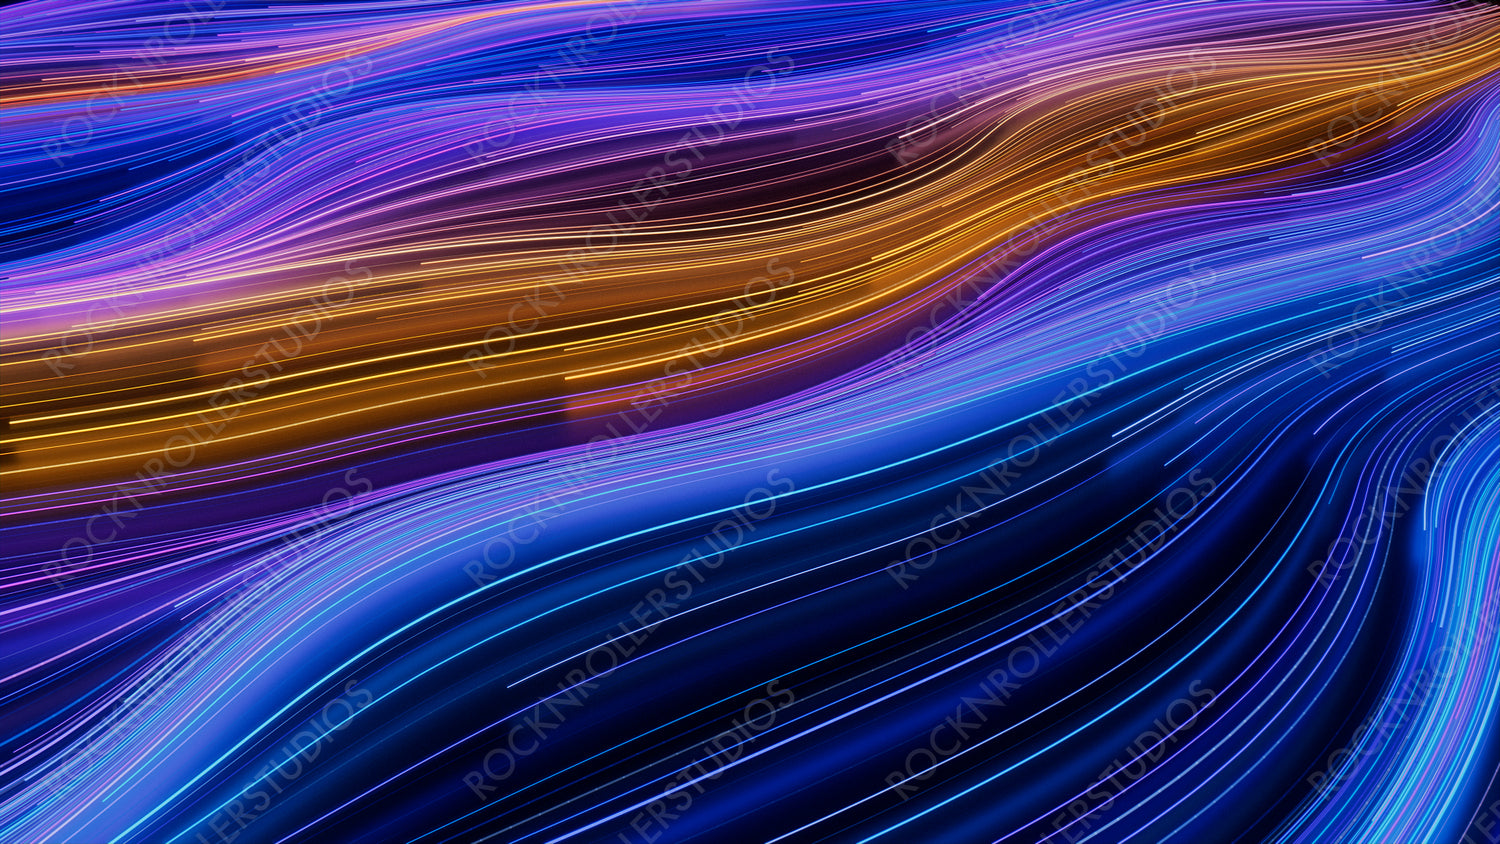 Abstract Neon Lights Background with Blue, Turquoise and Orange Streaks. 3D Render.